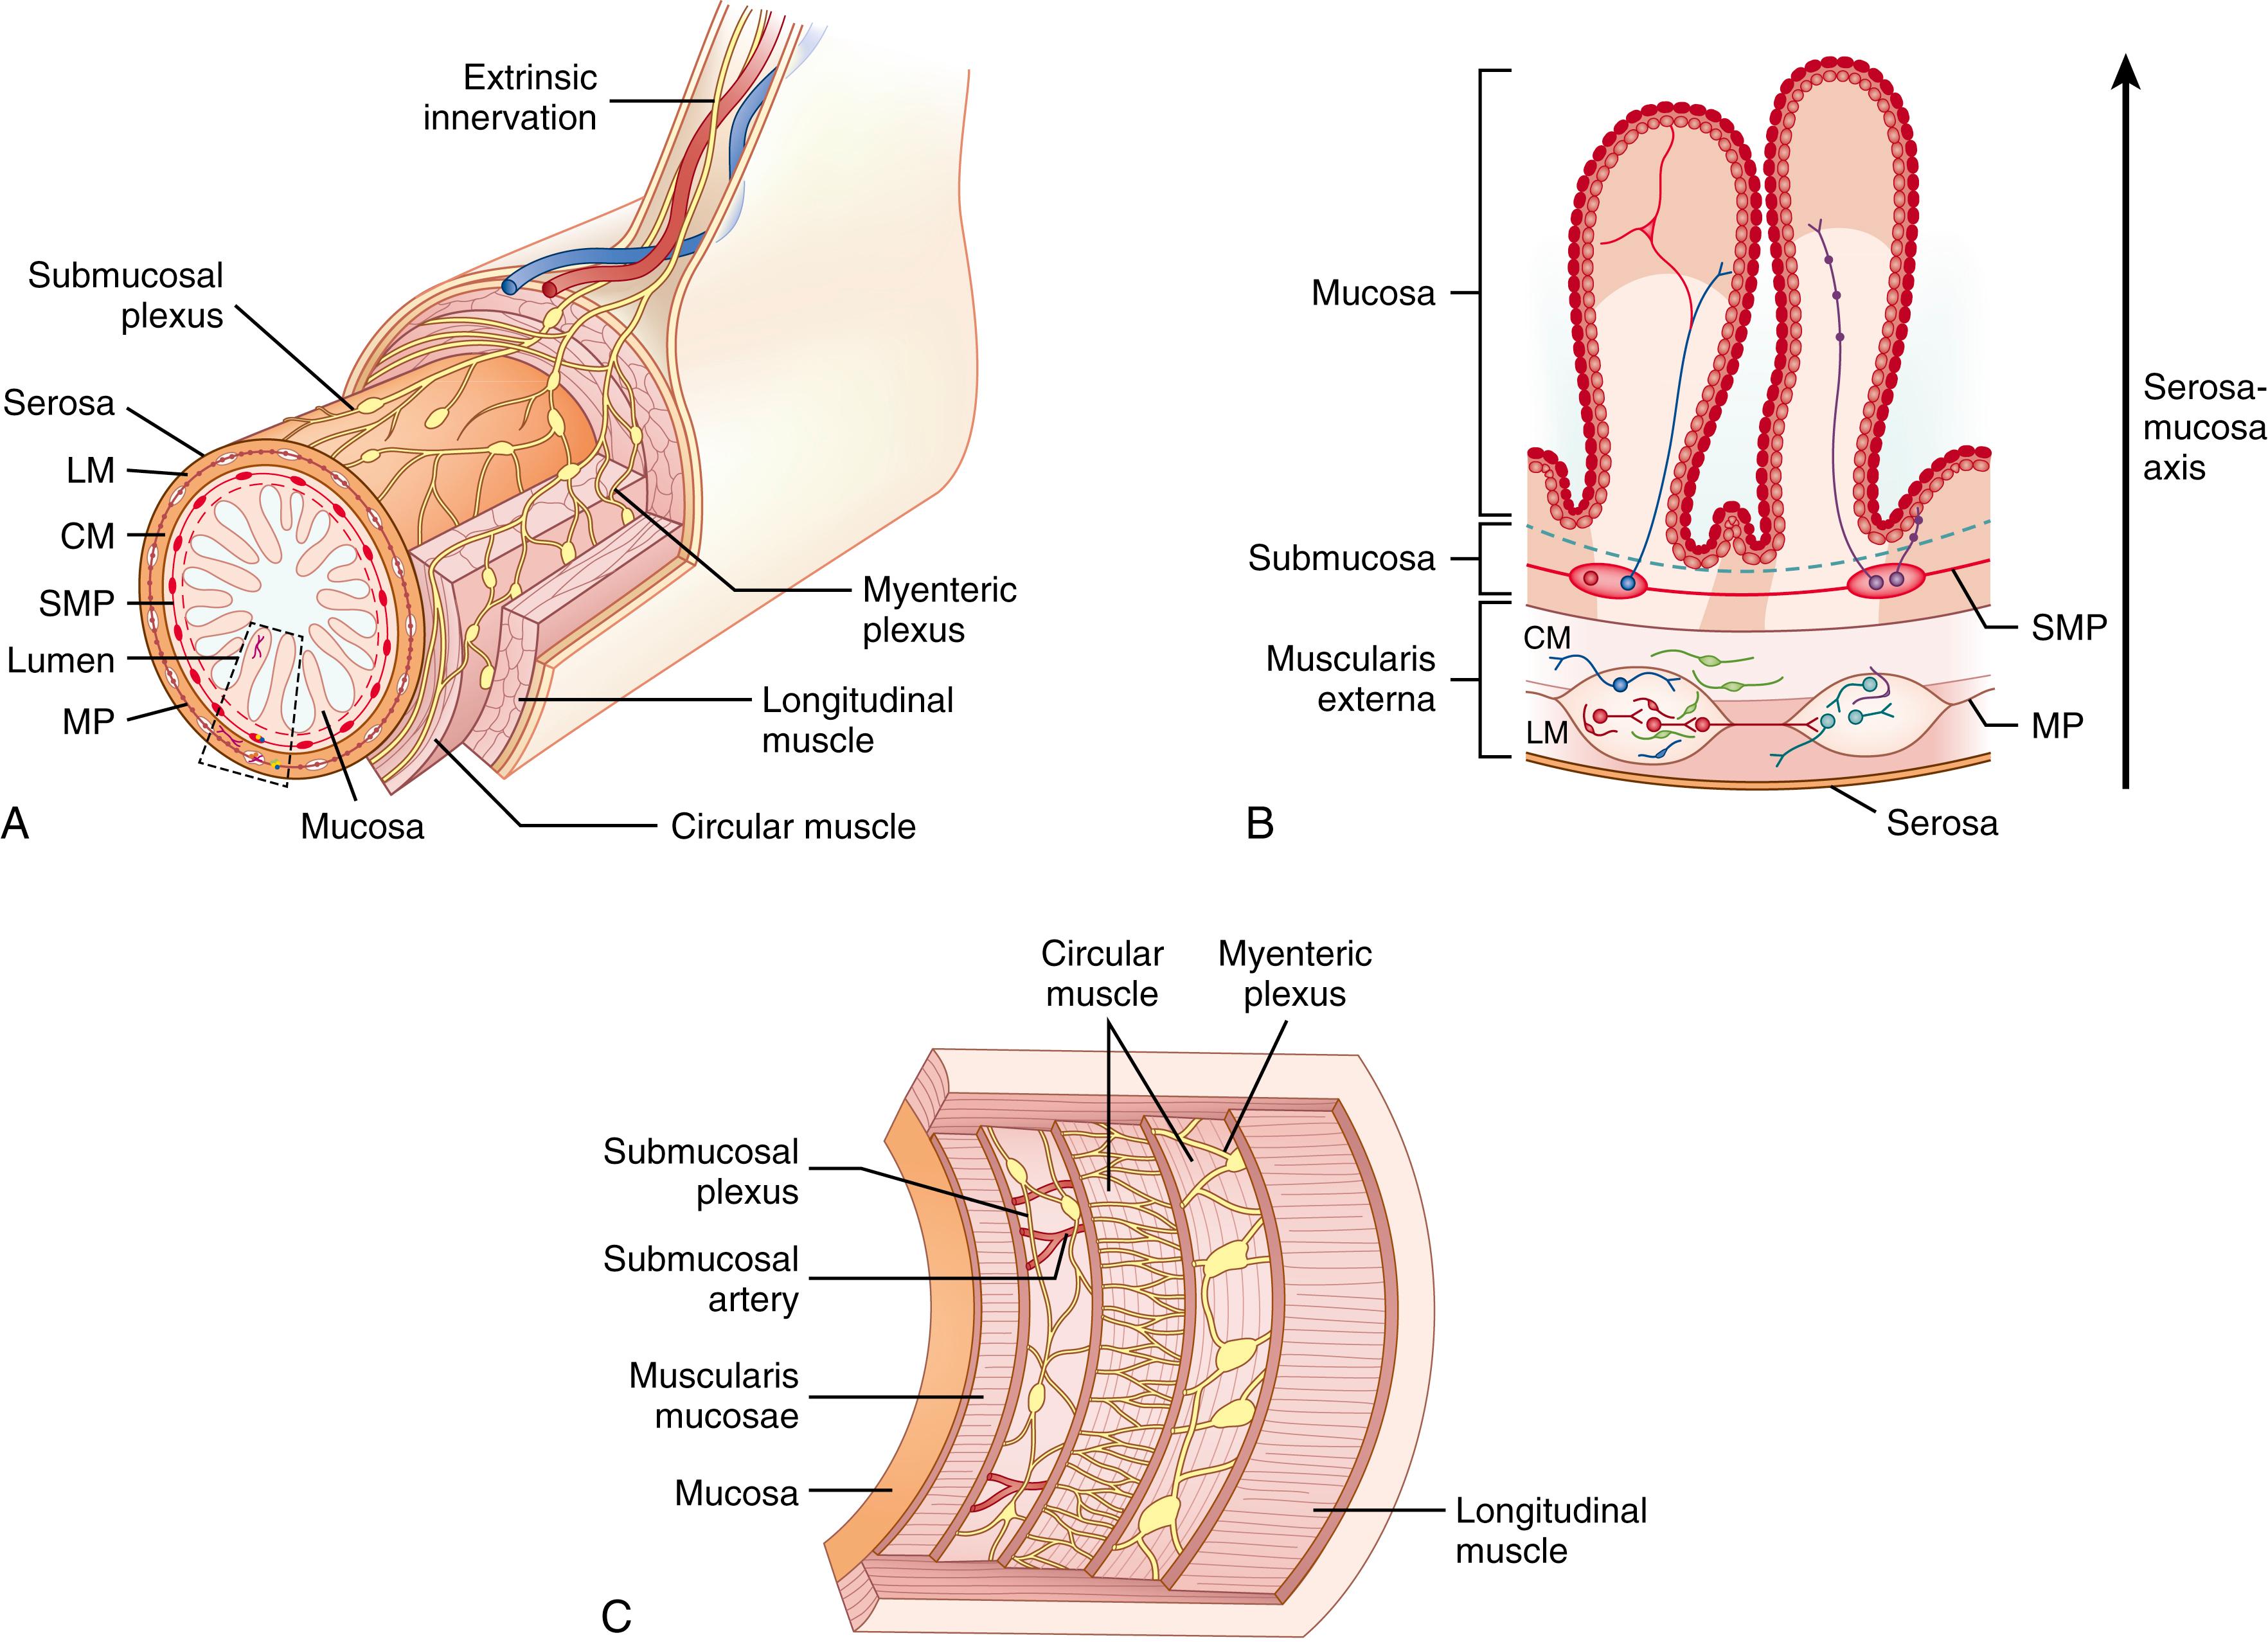 Fig. 84.1, (A) The organization of the ENS cross-sectional anatomy of intestinal and esophageal innervation: intestine (B) and esophagus (C). The boxed area (A) shows the neurons and glia of the mature ENS with the myenteric plexus (MP) located in the muscularis externa between the longitudinal (LM) and circular (CM) smooth muscle layers. The submucosal plexus (SMP) is located in the submucosal layer. ENS , Enteric nervous system.